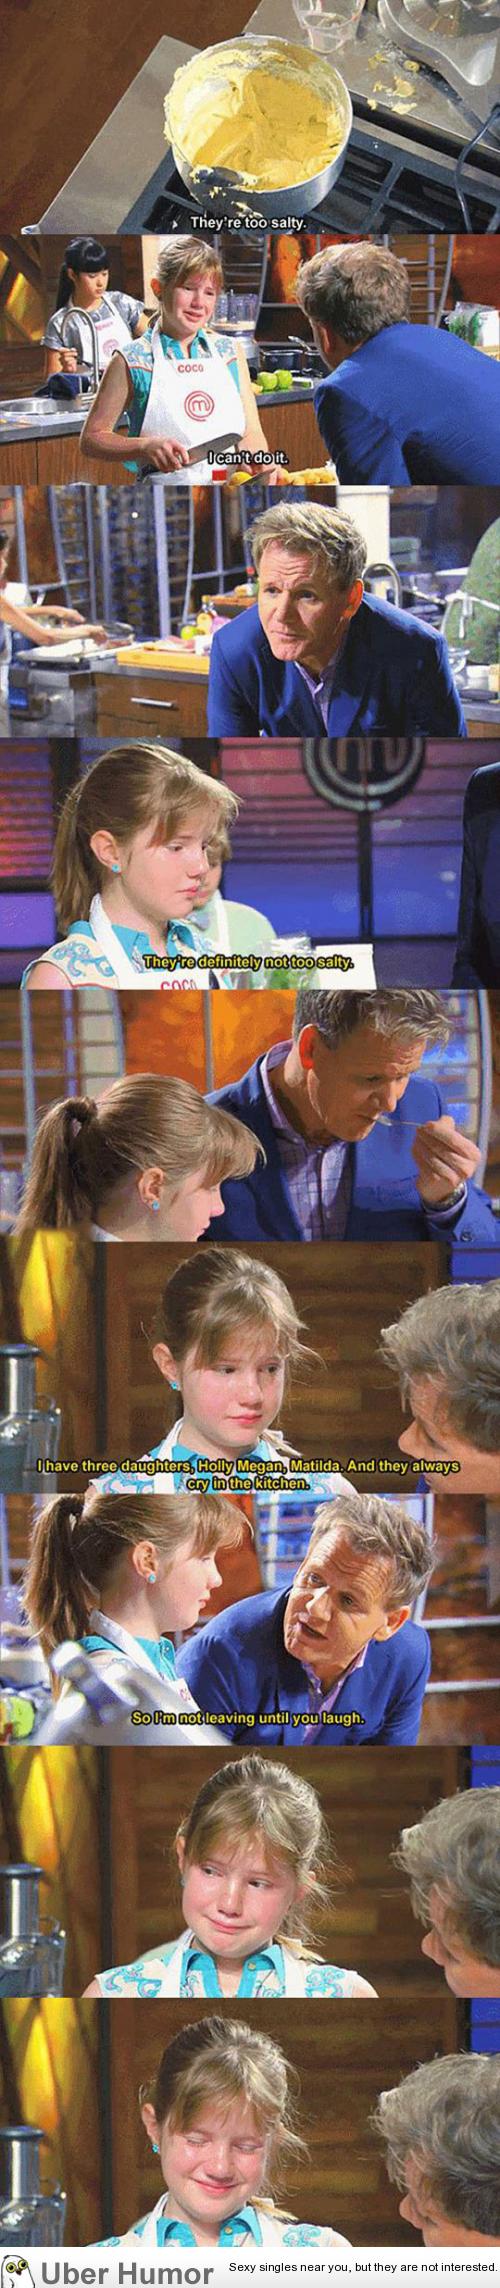 Gordon Ramsay can be wholesome too! | Funny Pictures, Quotes, Pics, Photos,  Images. Videos of Really Very Cute animals.